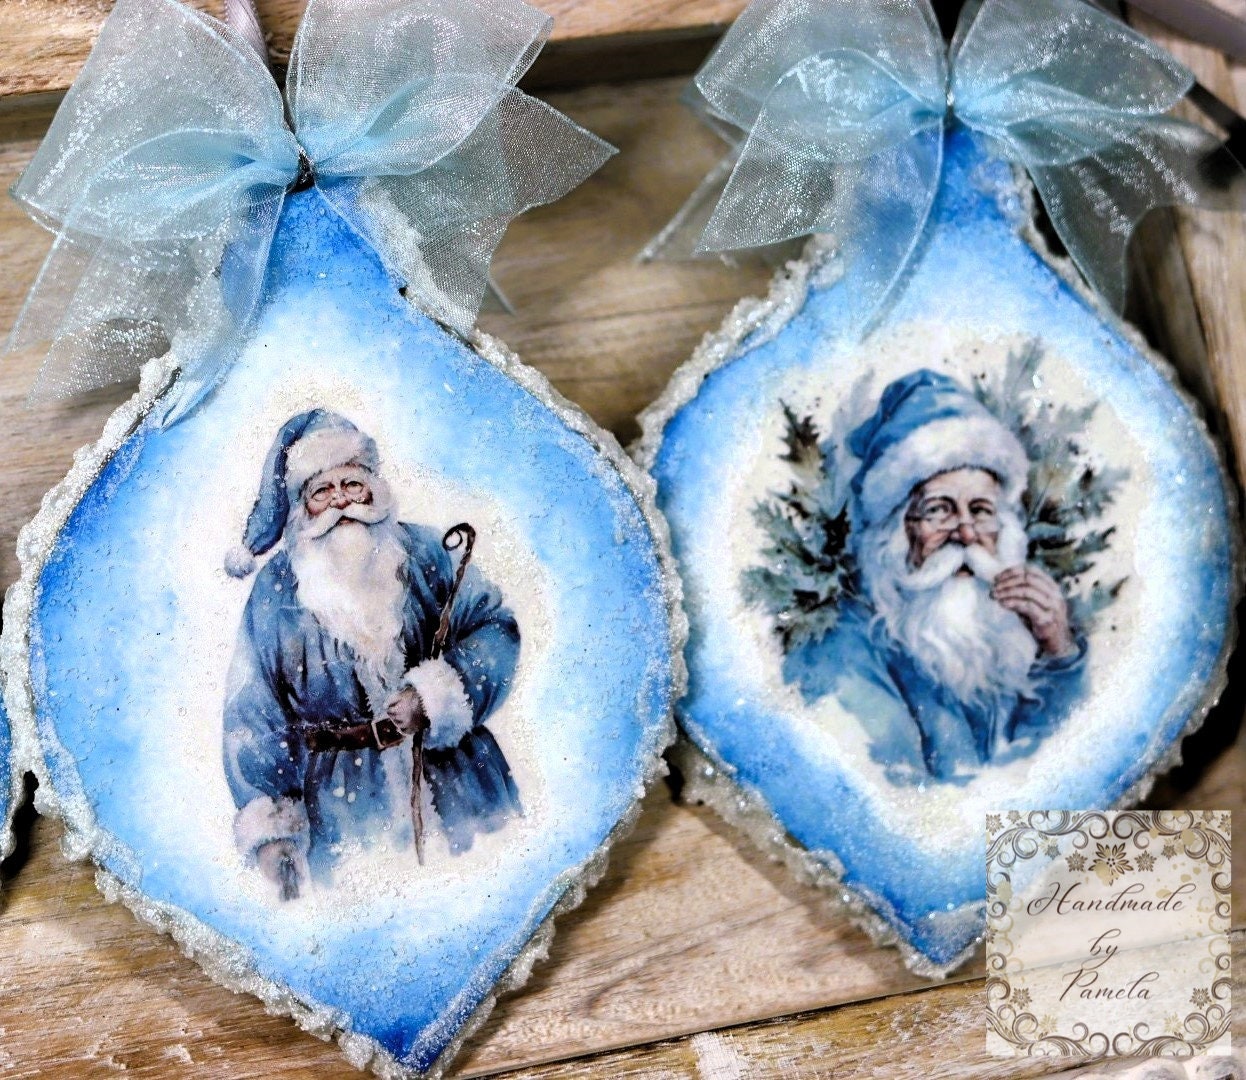 Handcrafted, Shabby Chic, Mixed Media, Decoupage, Blue, Santa, Ice, Snow, Christmas Ornament Set of 3, Holiday, Decoration, Collectible